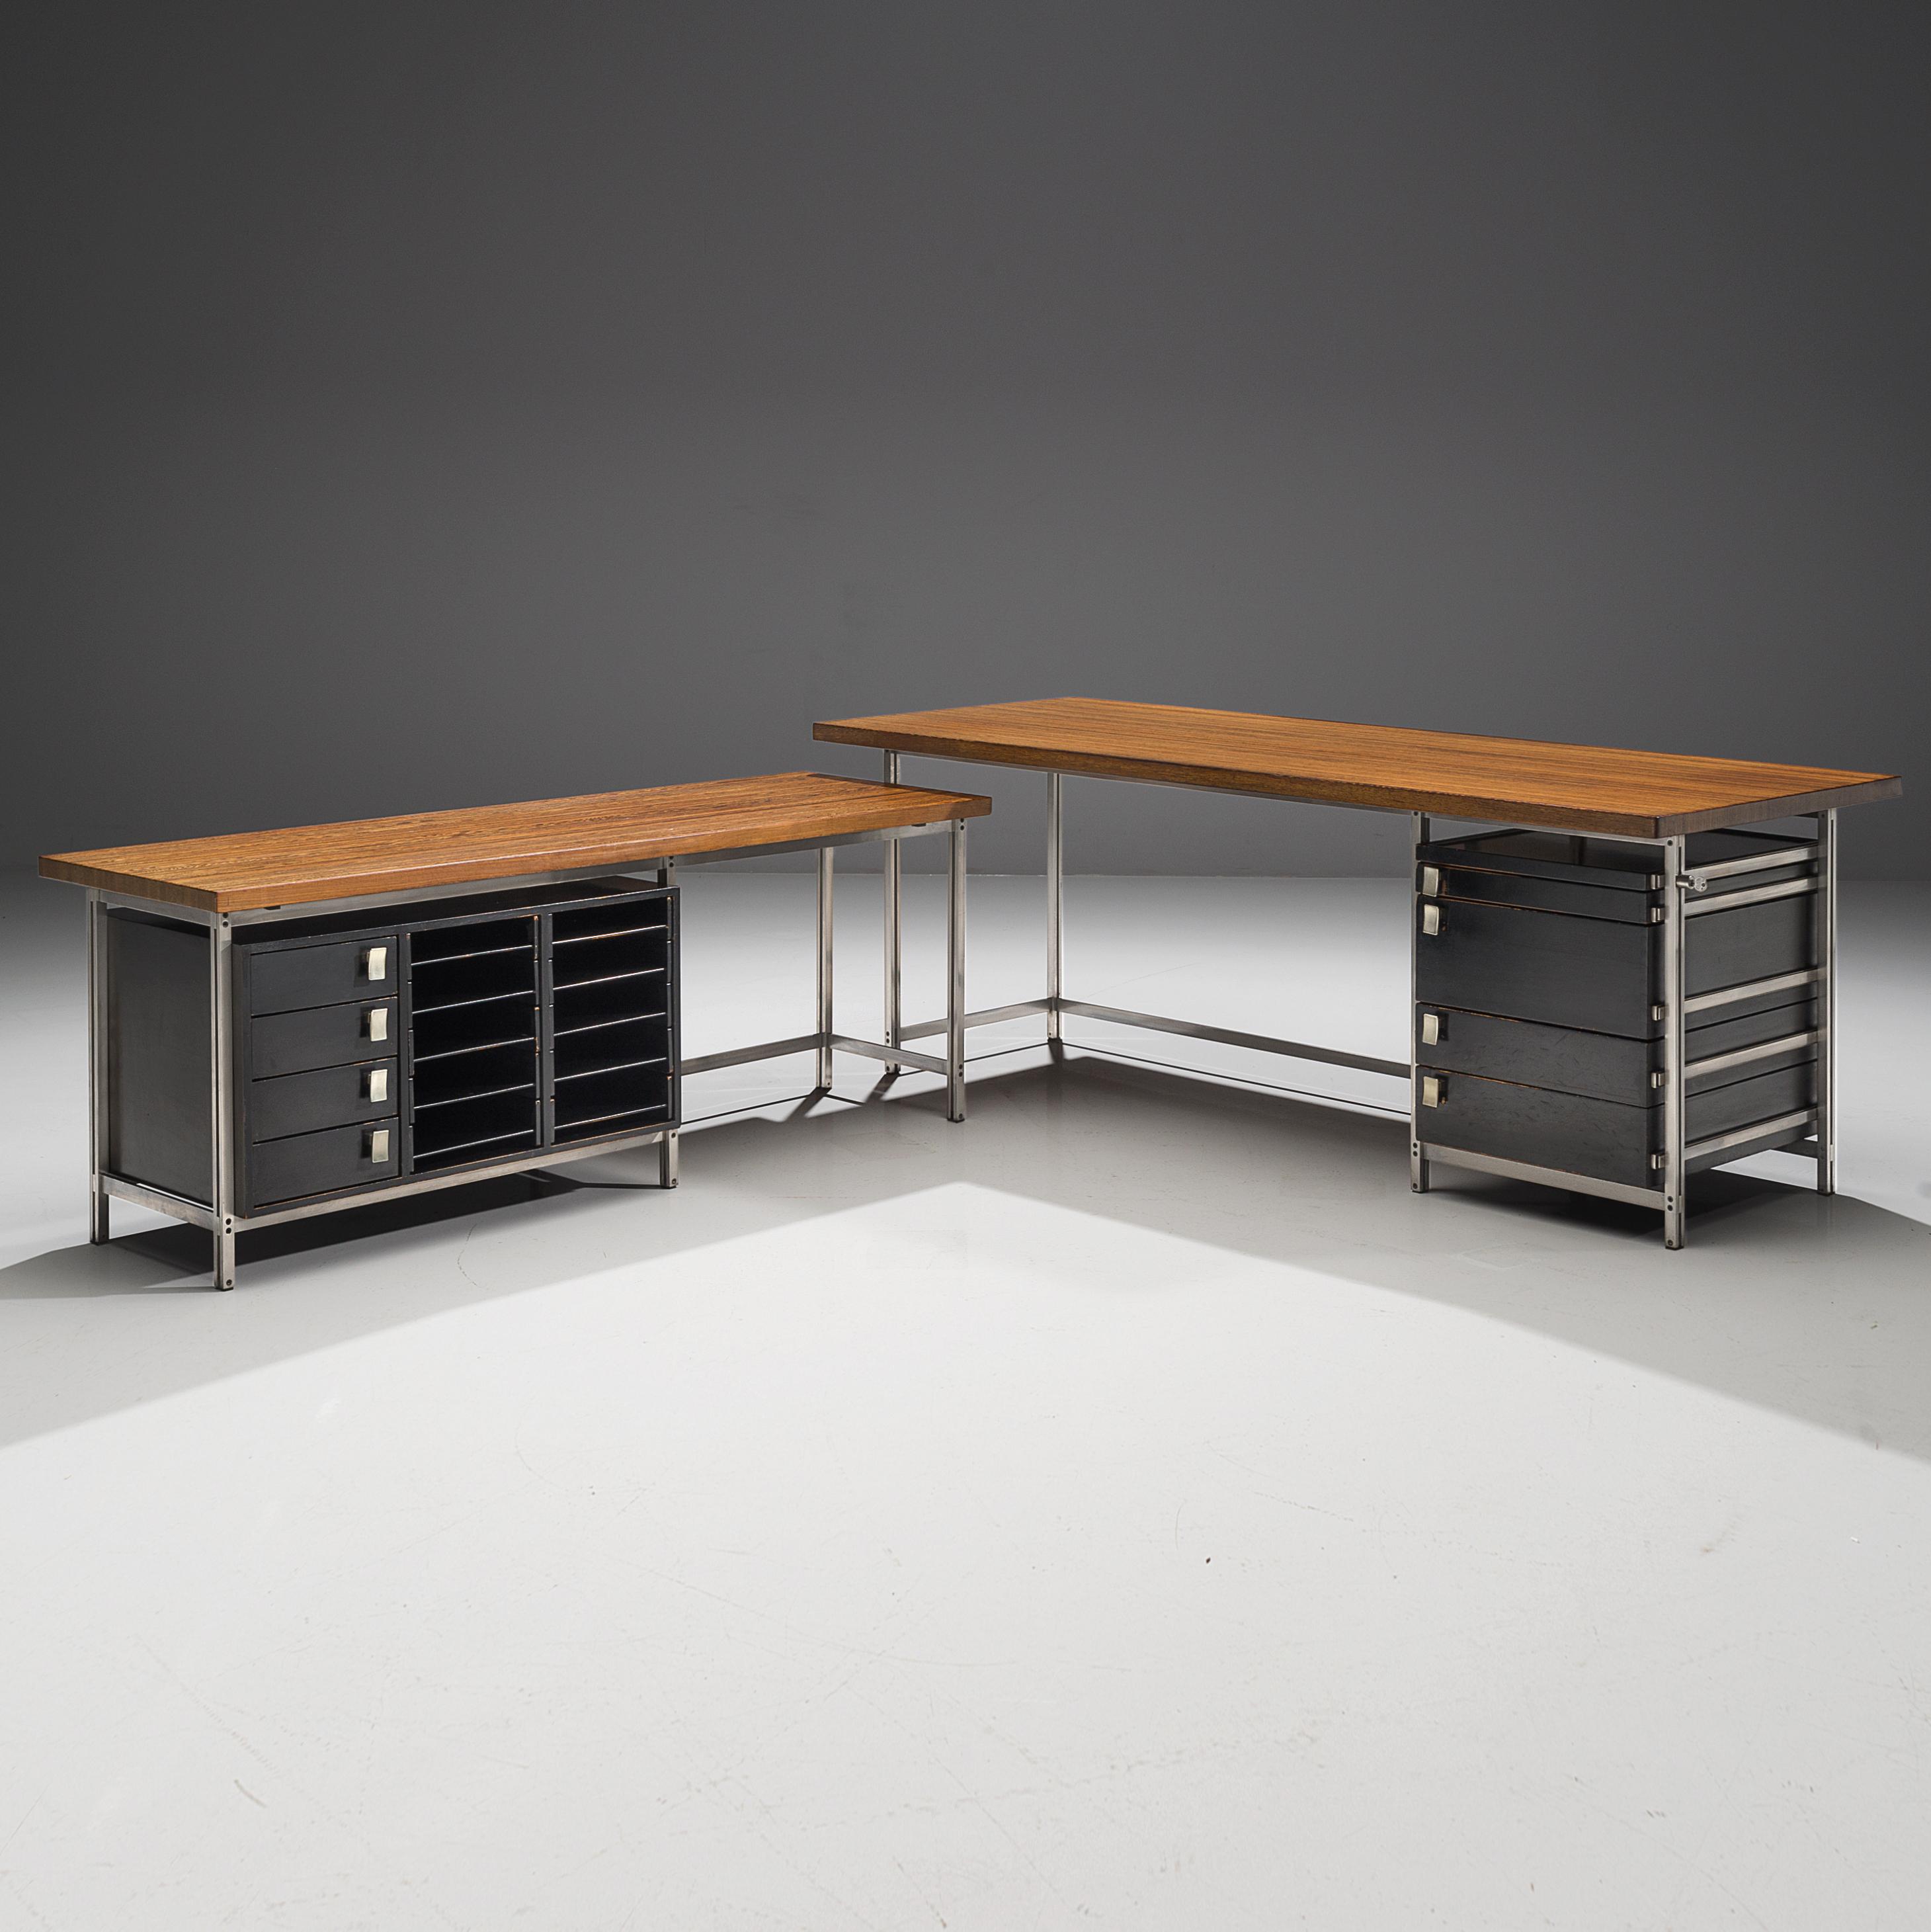 Jules Wabbes, writing desk with drawer compartments, wengé, metal, lacquered wood, Belgium, 1960s.

This corner desk is designed by Jules Wabbes. The table is executed with a solid wengé wooden top, made of tangentially-sawn wengé slats. The